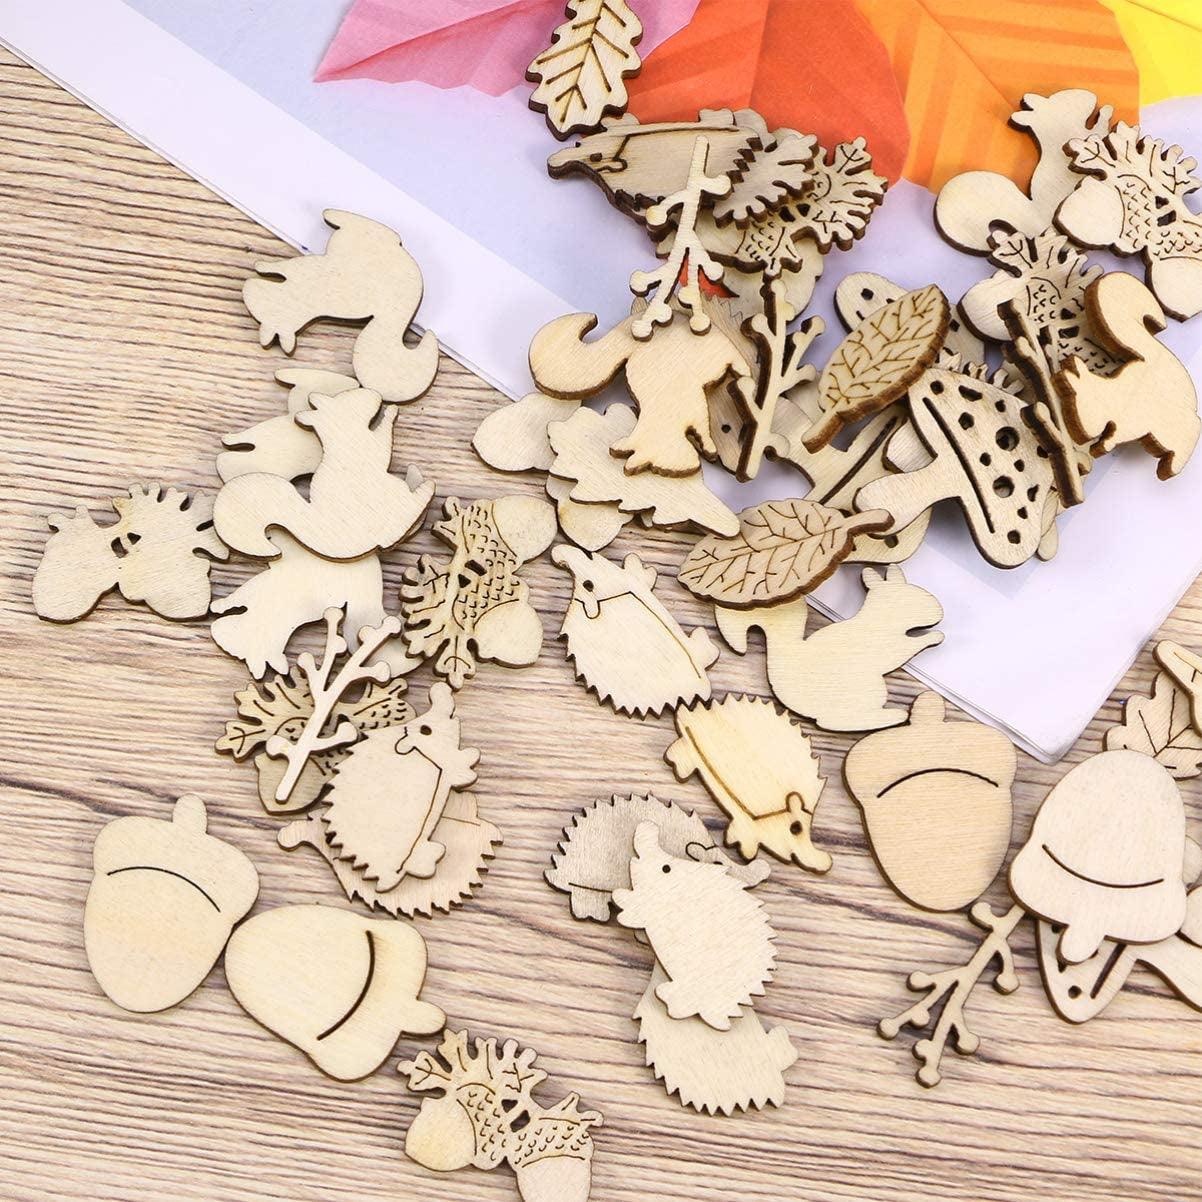 Wooden Animals and Plants Shaped Cutouts Wood Ornament for Crafts Projects, Home/Party Decorations - WoodArtSupply